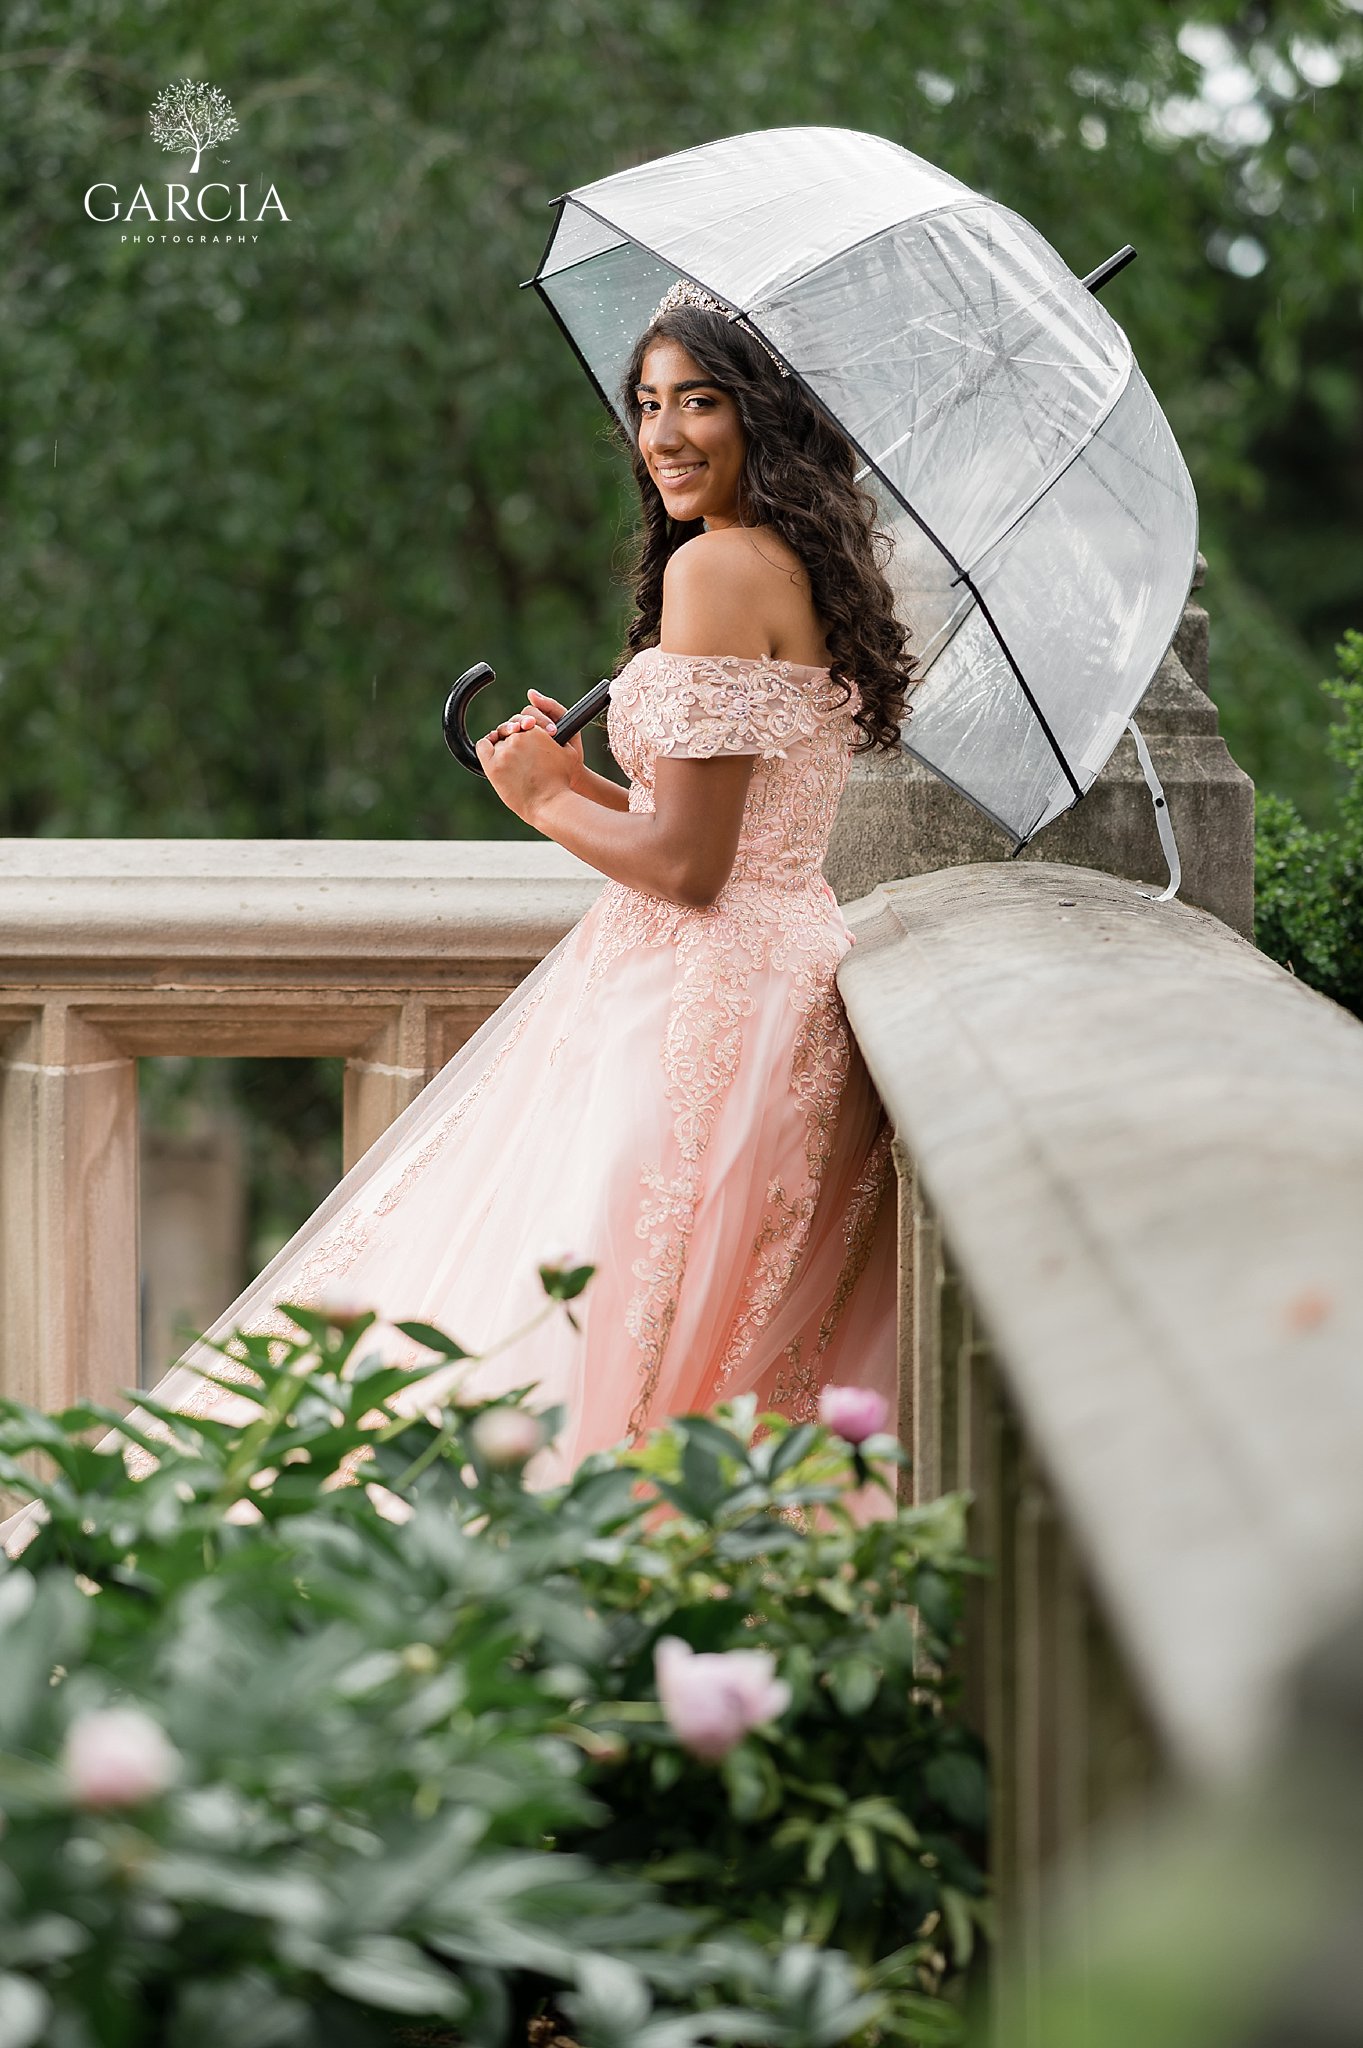 Emily-Quince-Session-Garcia-Photography-7813.jpg